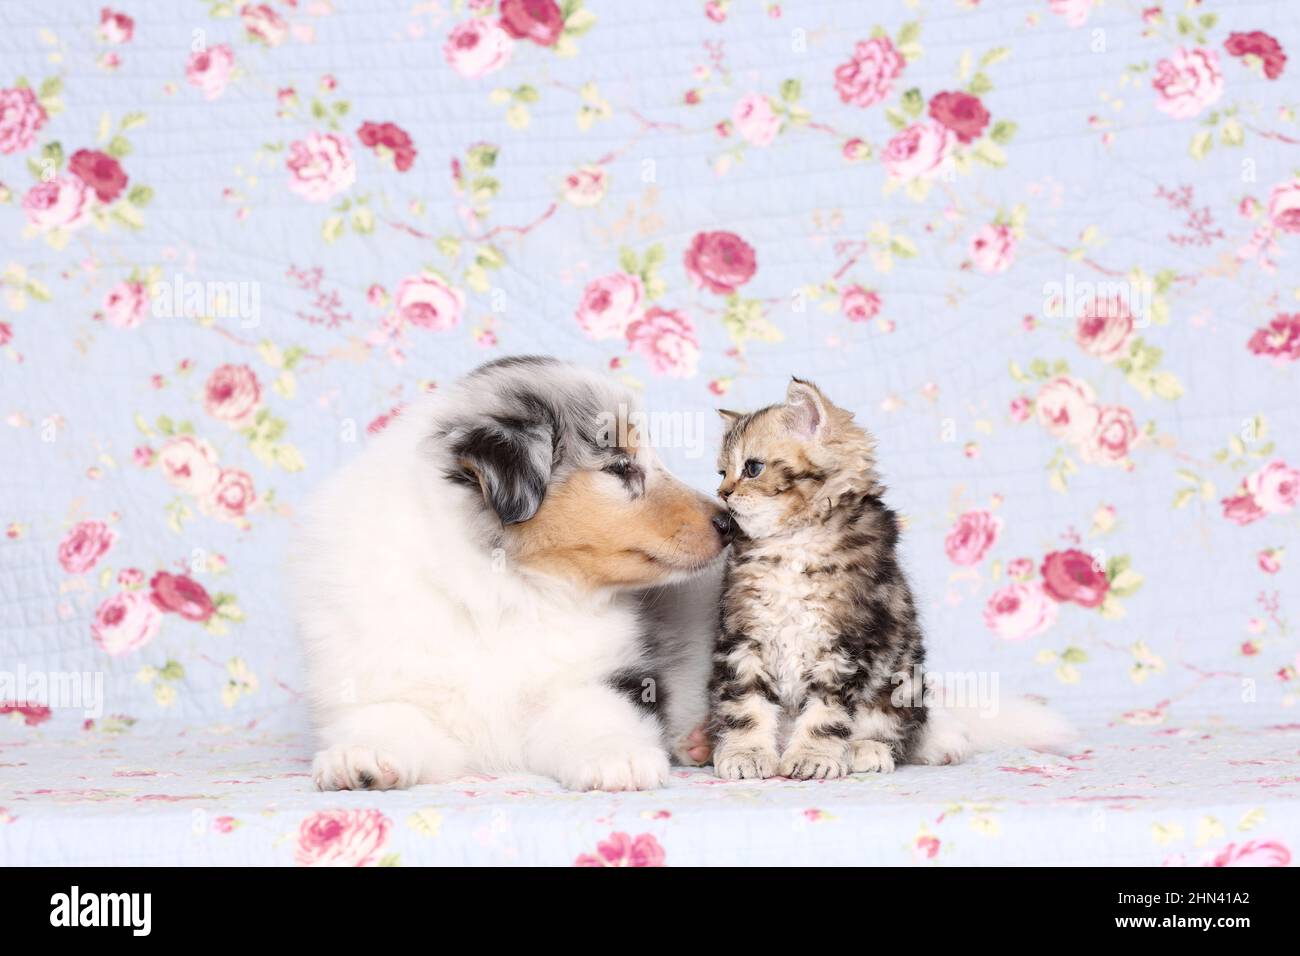 Selkirk Rex. Kitten and an American Collie puppy smooching on a blanket with flower print. Studio picture. Germany Stock Photo